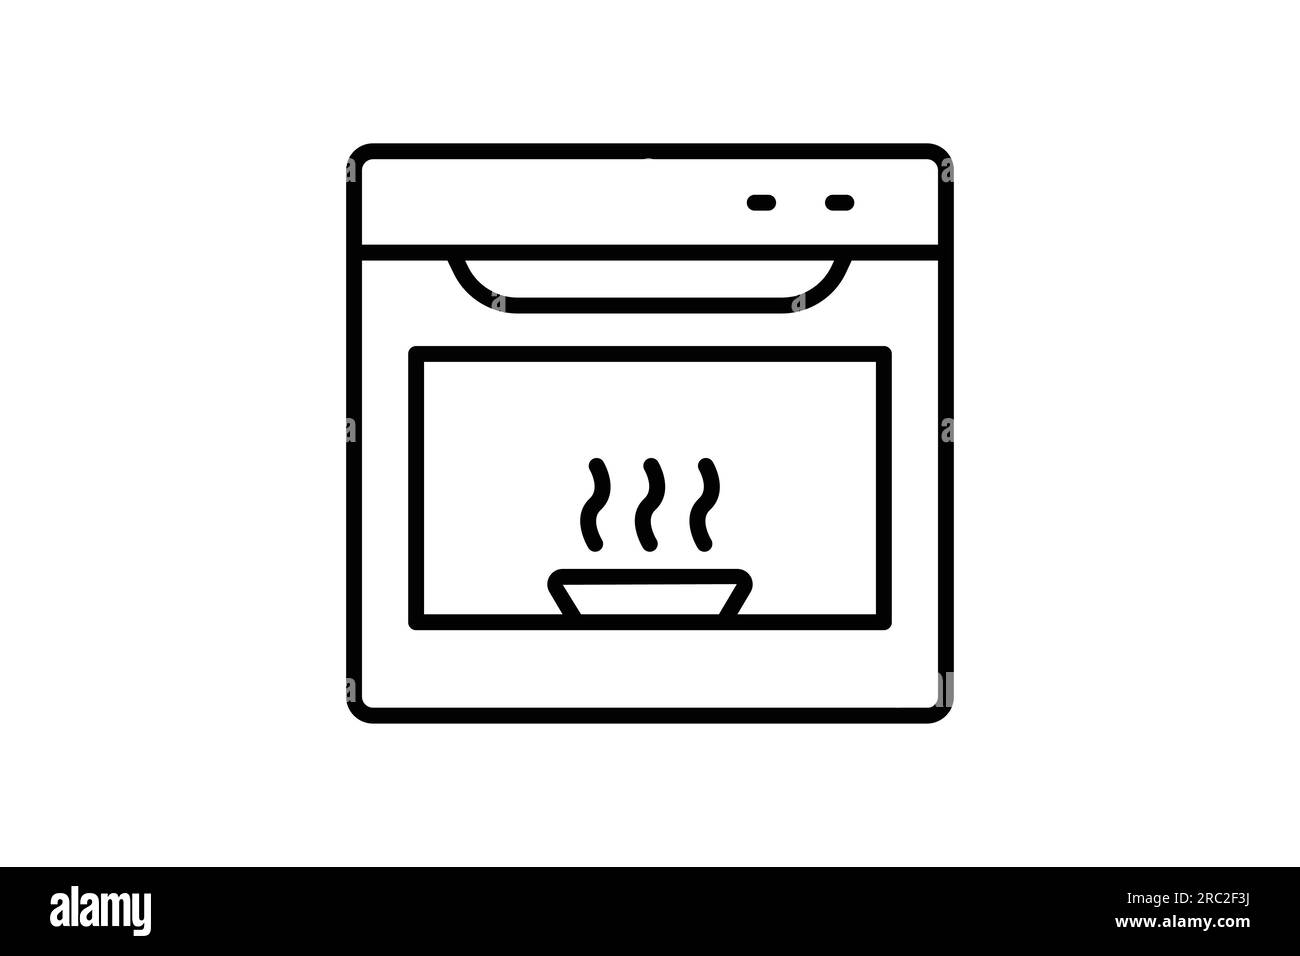 Oven icon. icon related to electronic, household appliances. Line icon style design. Simple vector design editable Stock Vector